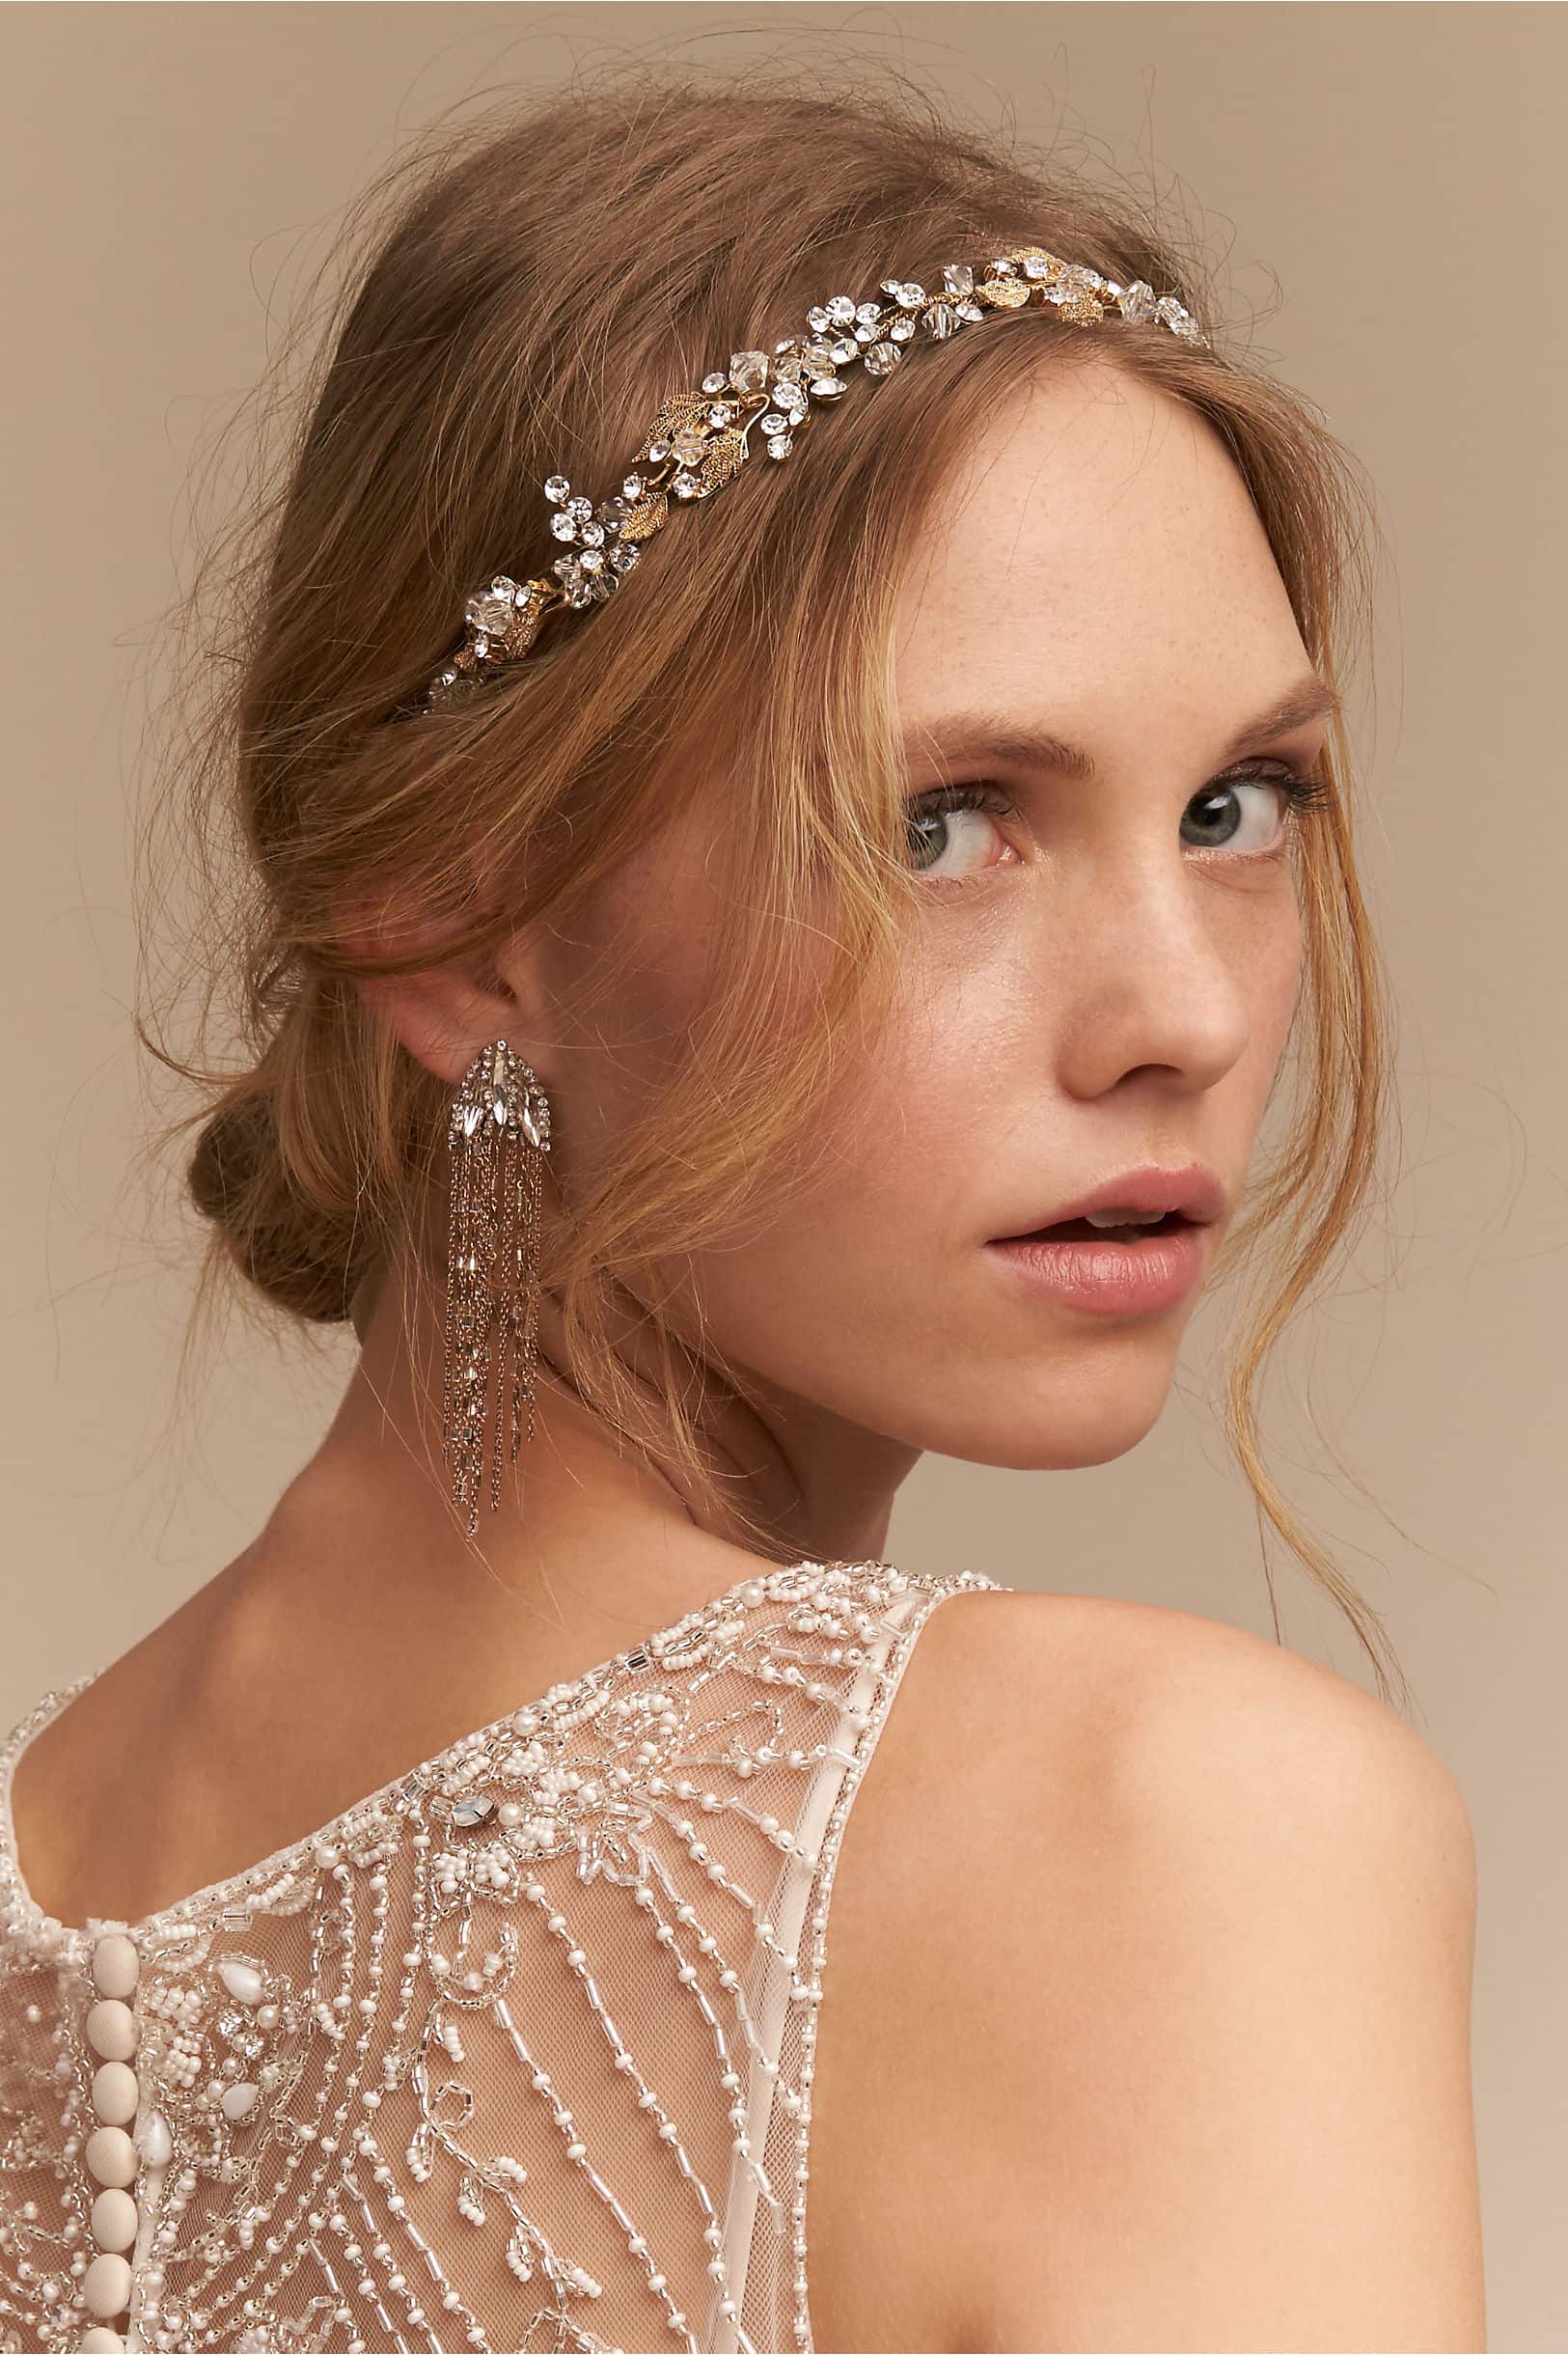 Bridal Headbands for Gorgeous Wedding Hairstyles! - Dress for the Wedding